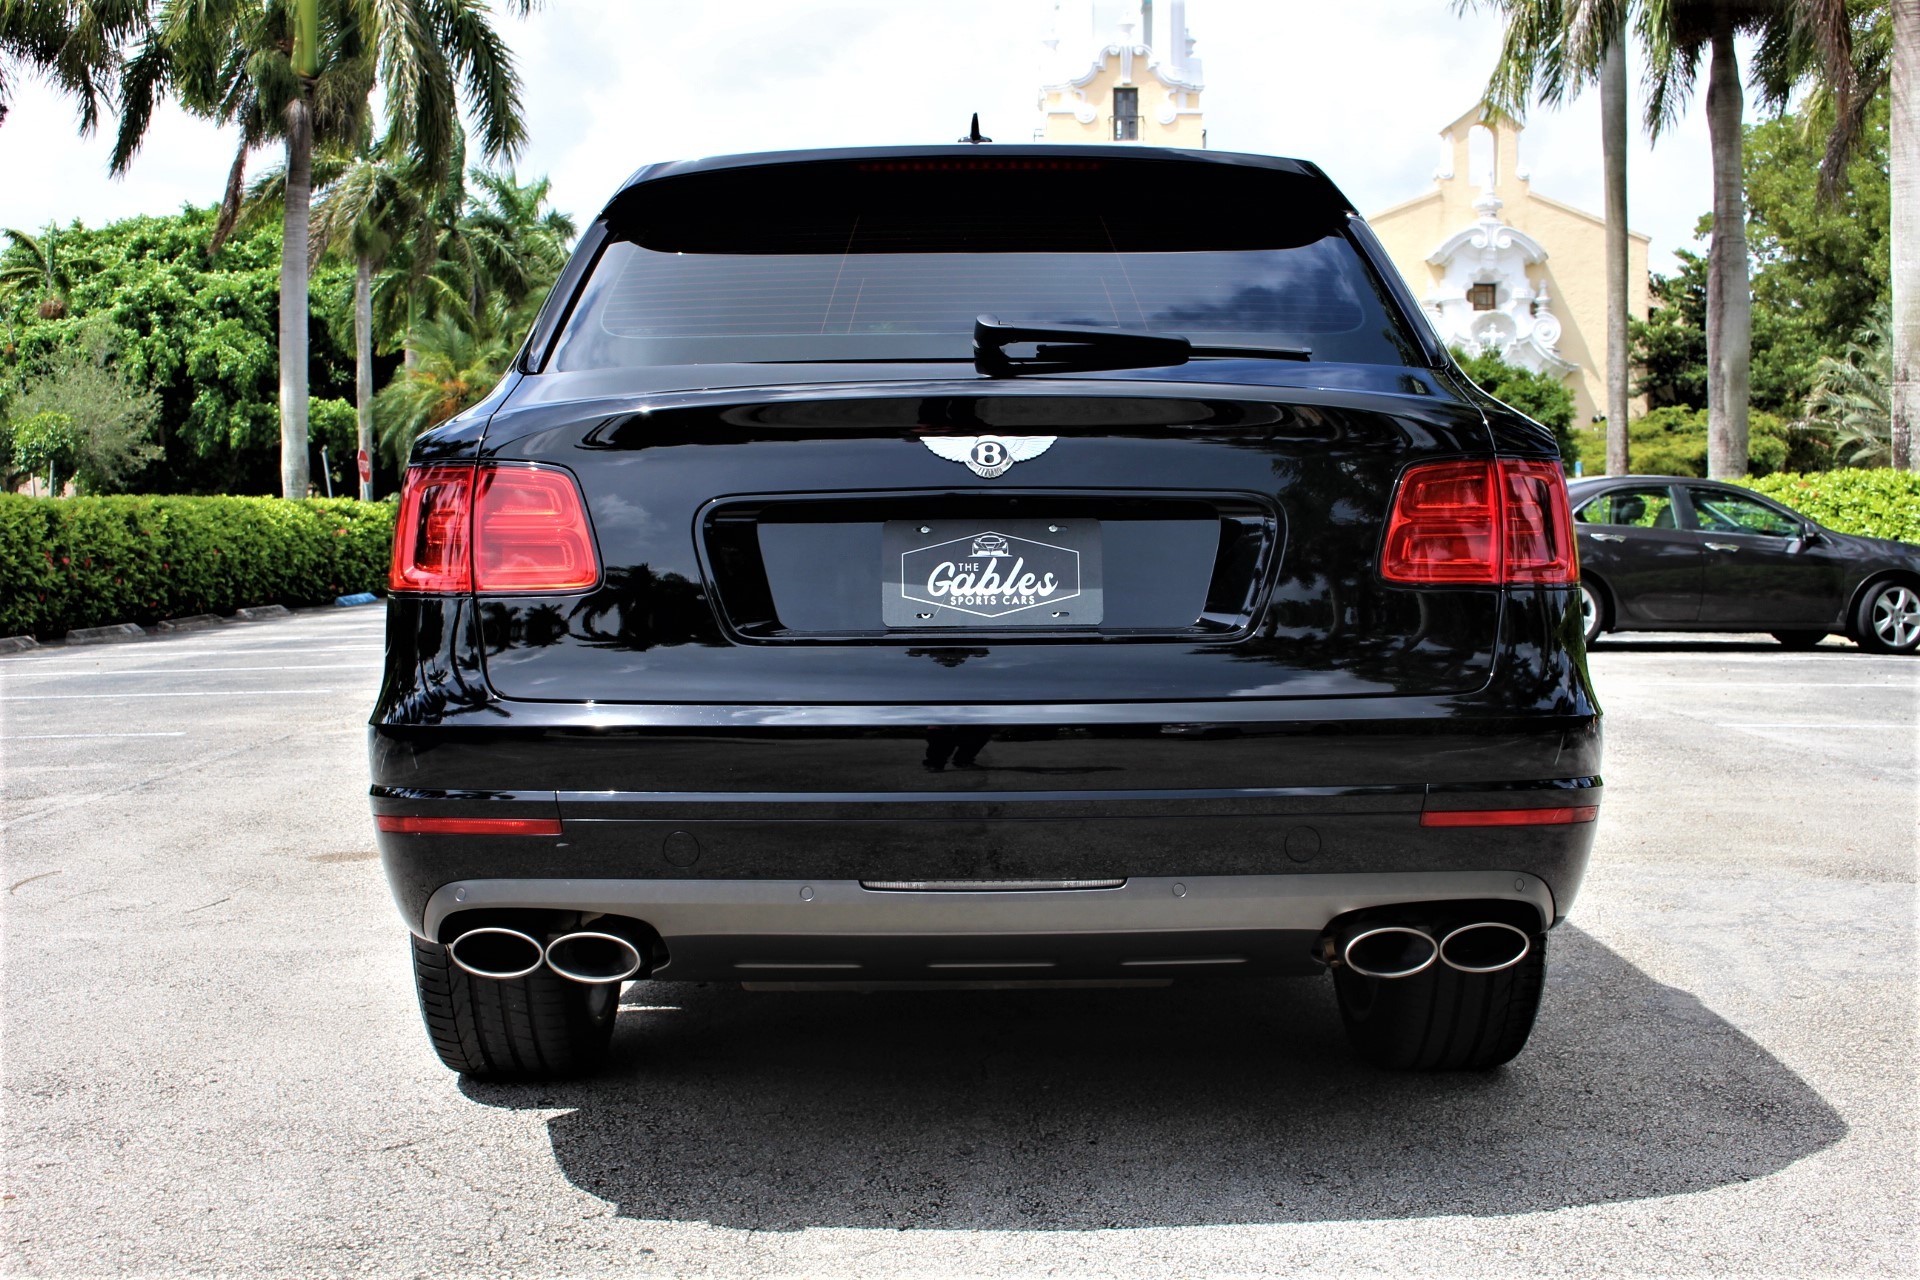 Used 2018 Bentley Bentayga W12 Signature Edition for sale Sold at The Gables Sports Cars in Miami FL 33146 4